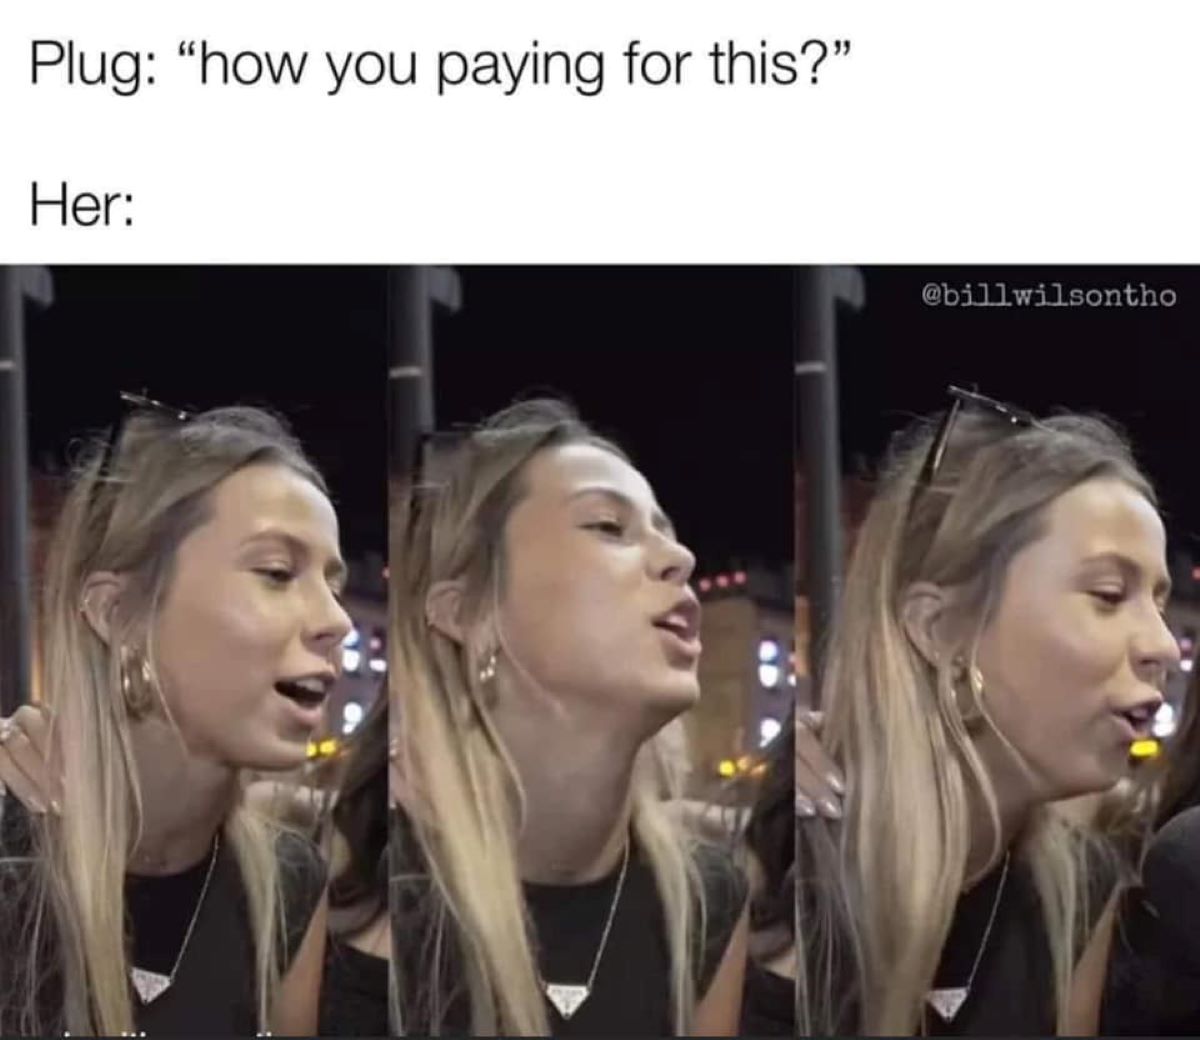 Internet meme - Plug "how you paying for this?" Her